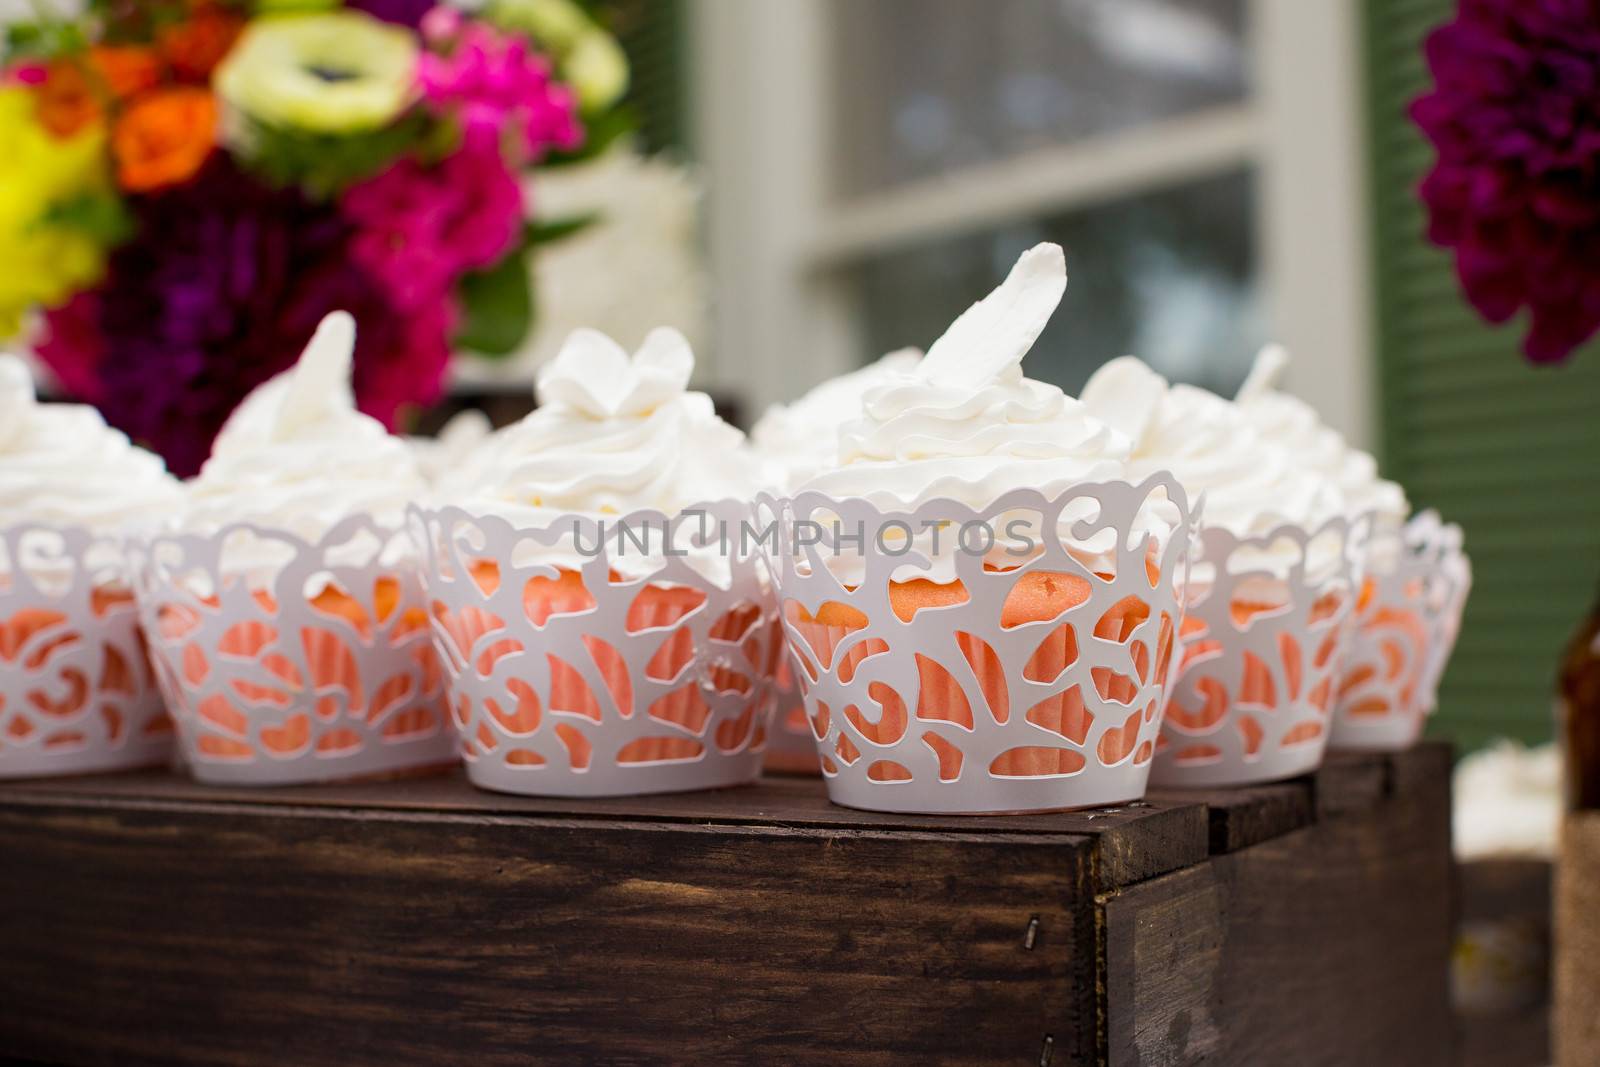 Wedding Cupcakes at Reception by joshuaraineyphotography